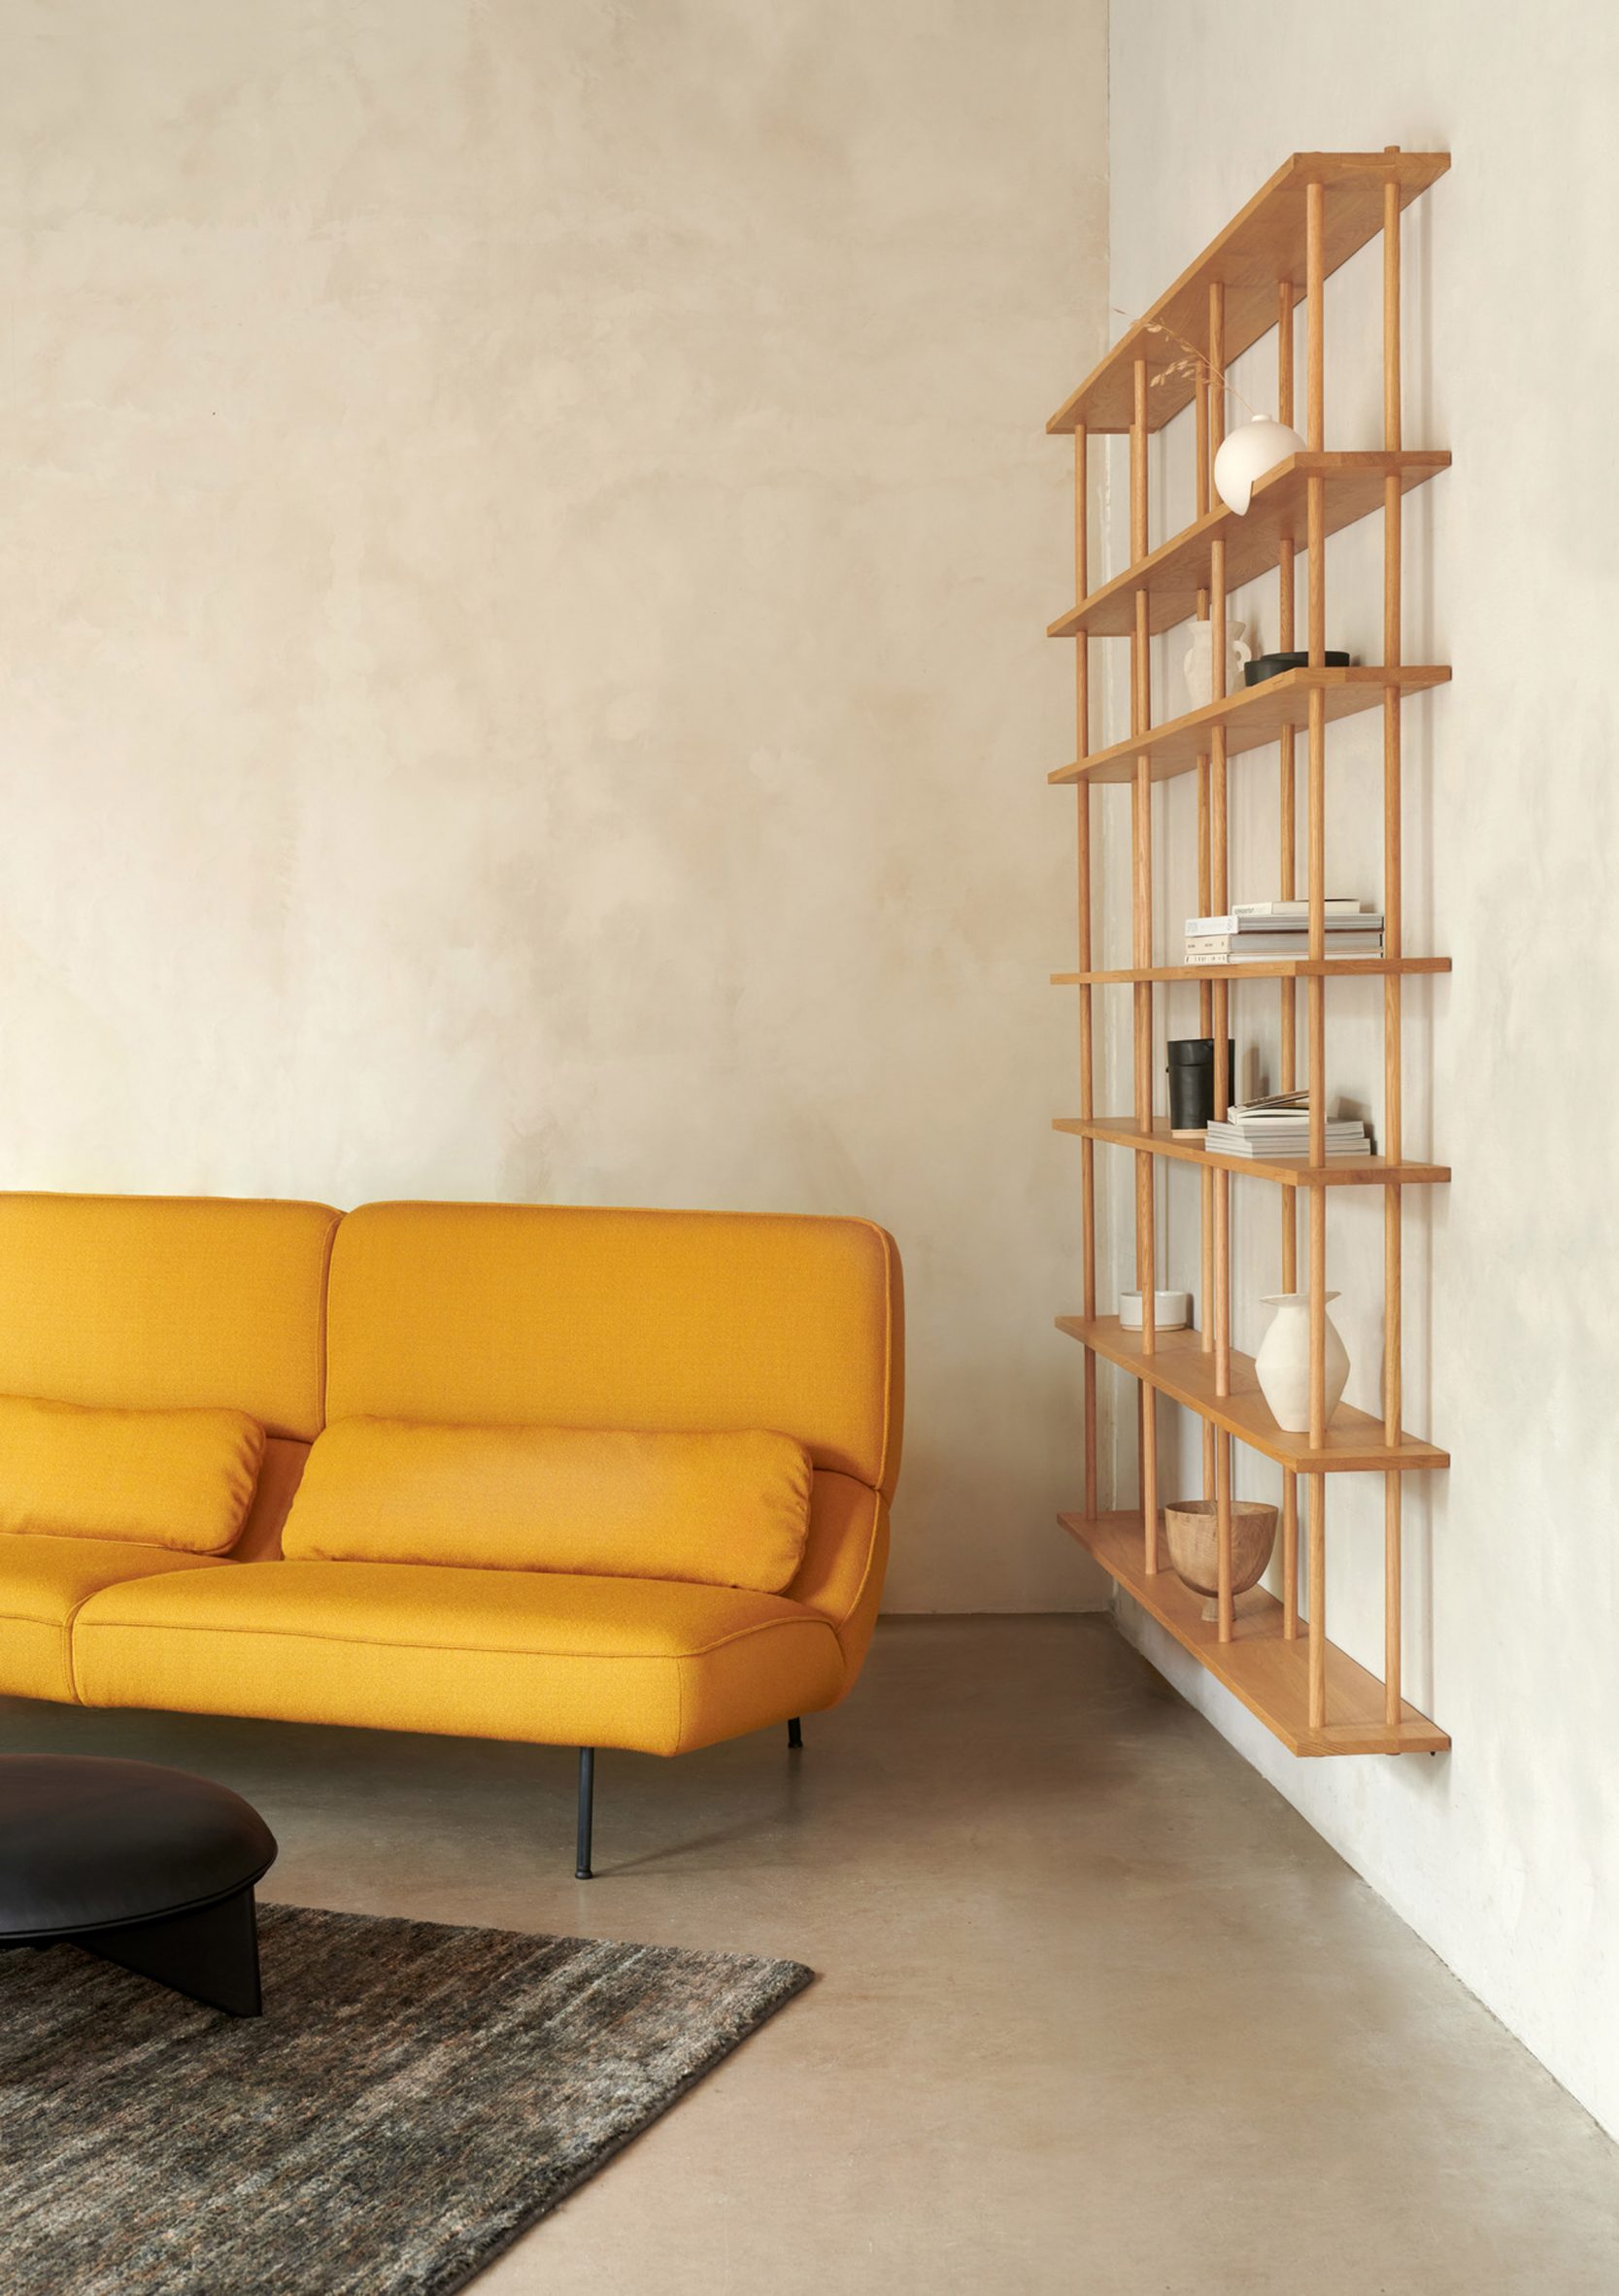 Velar sofa in yellow next to a wooden wall shelf